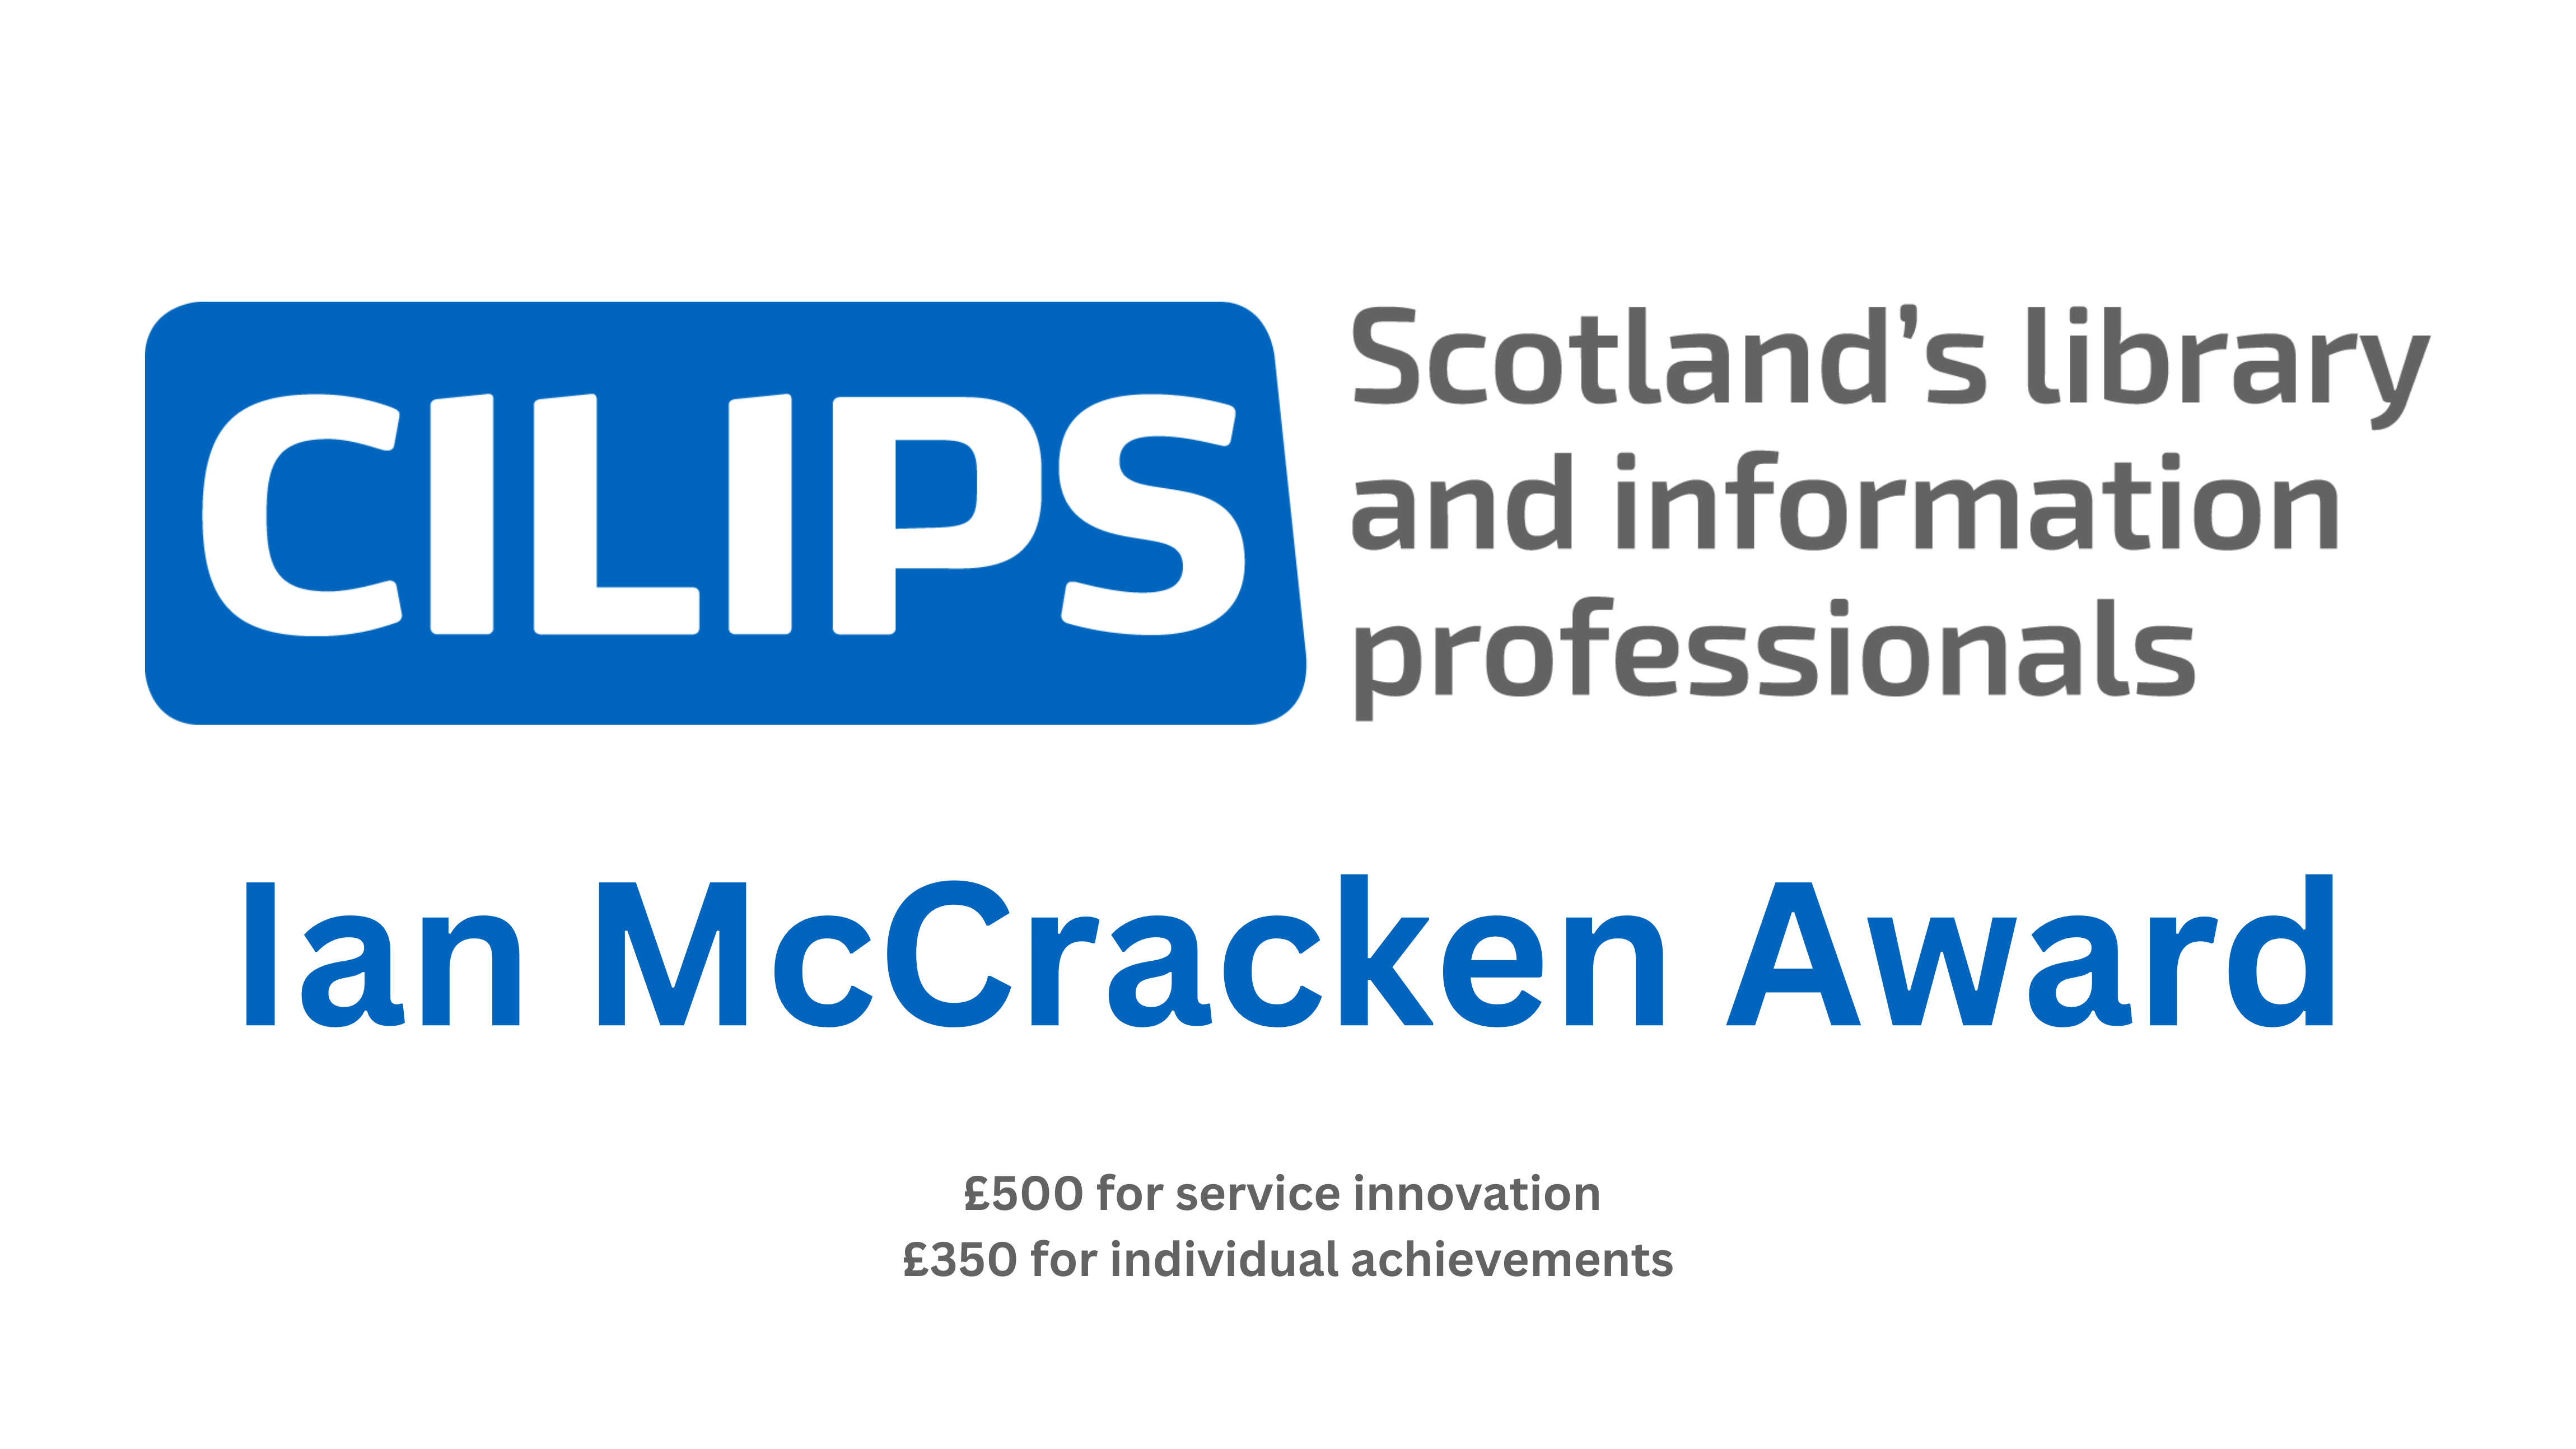 Ian McCracken award, CILIPS. £500 for service innovation and £350 for individual achievement.